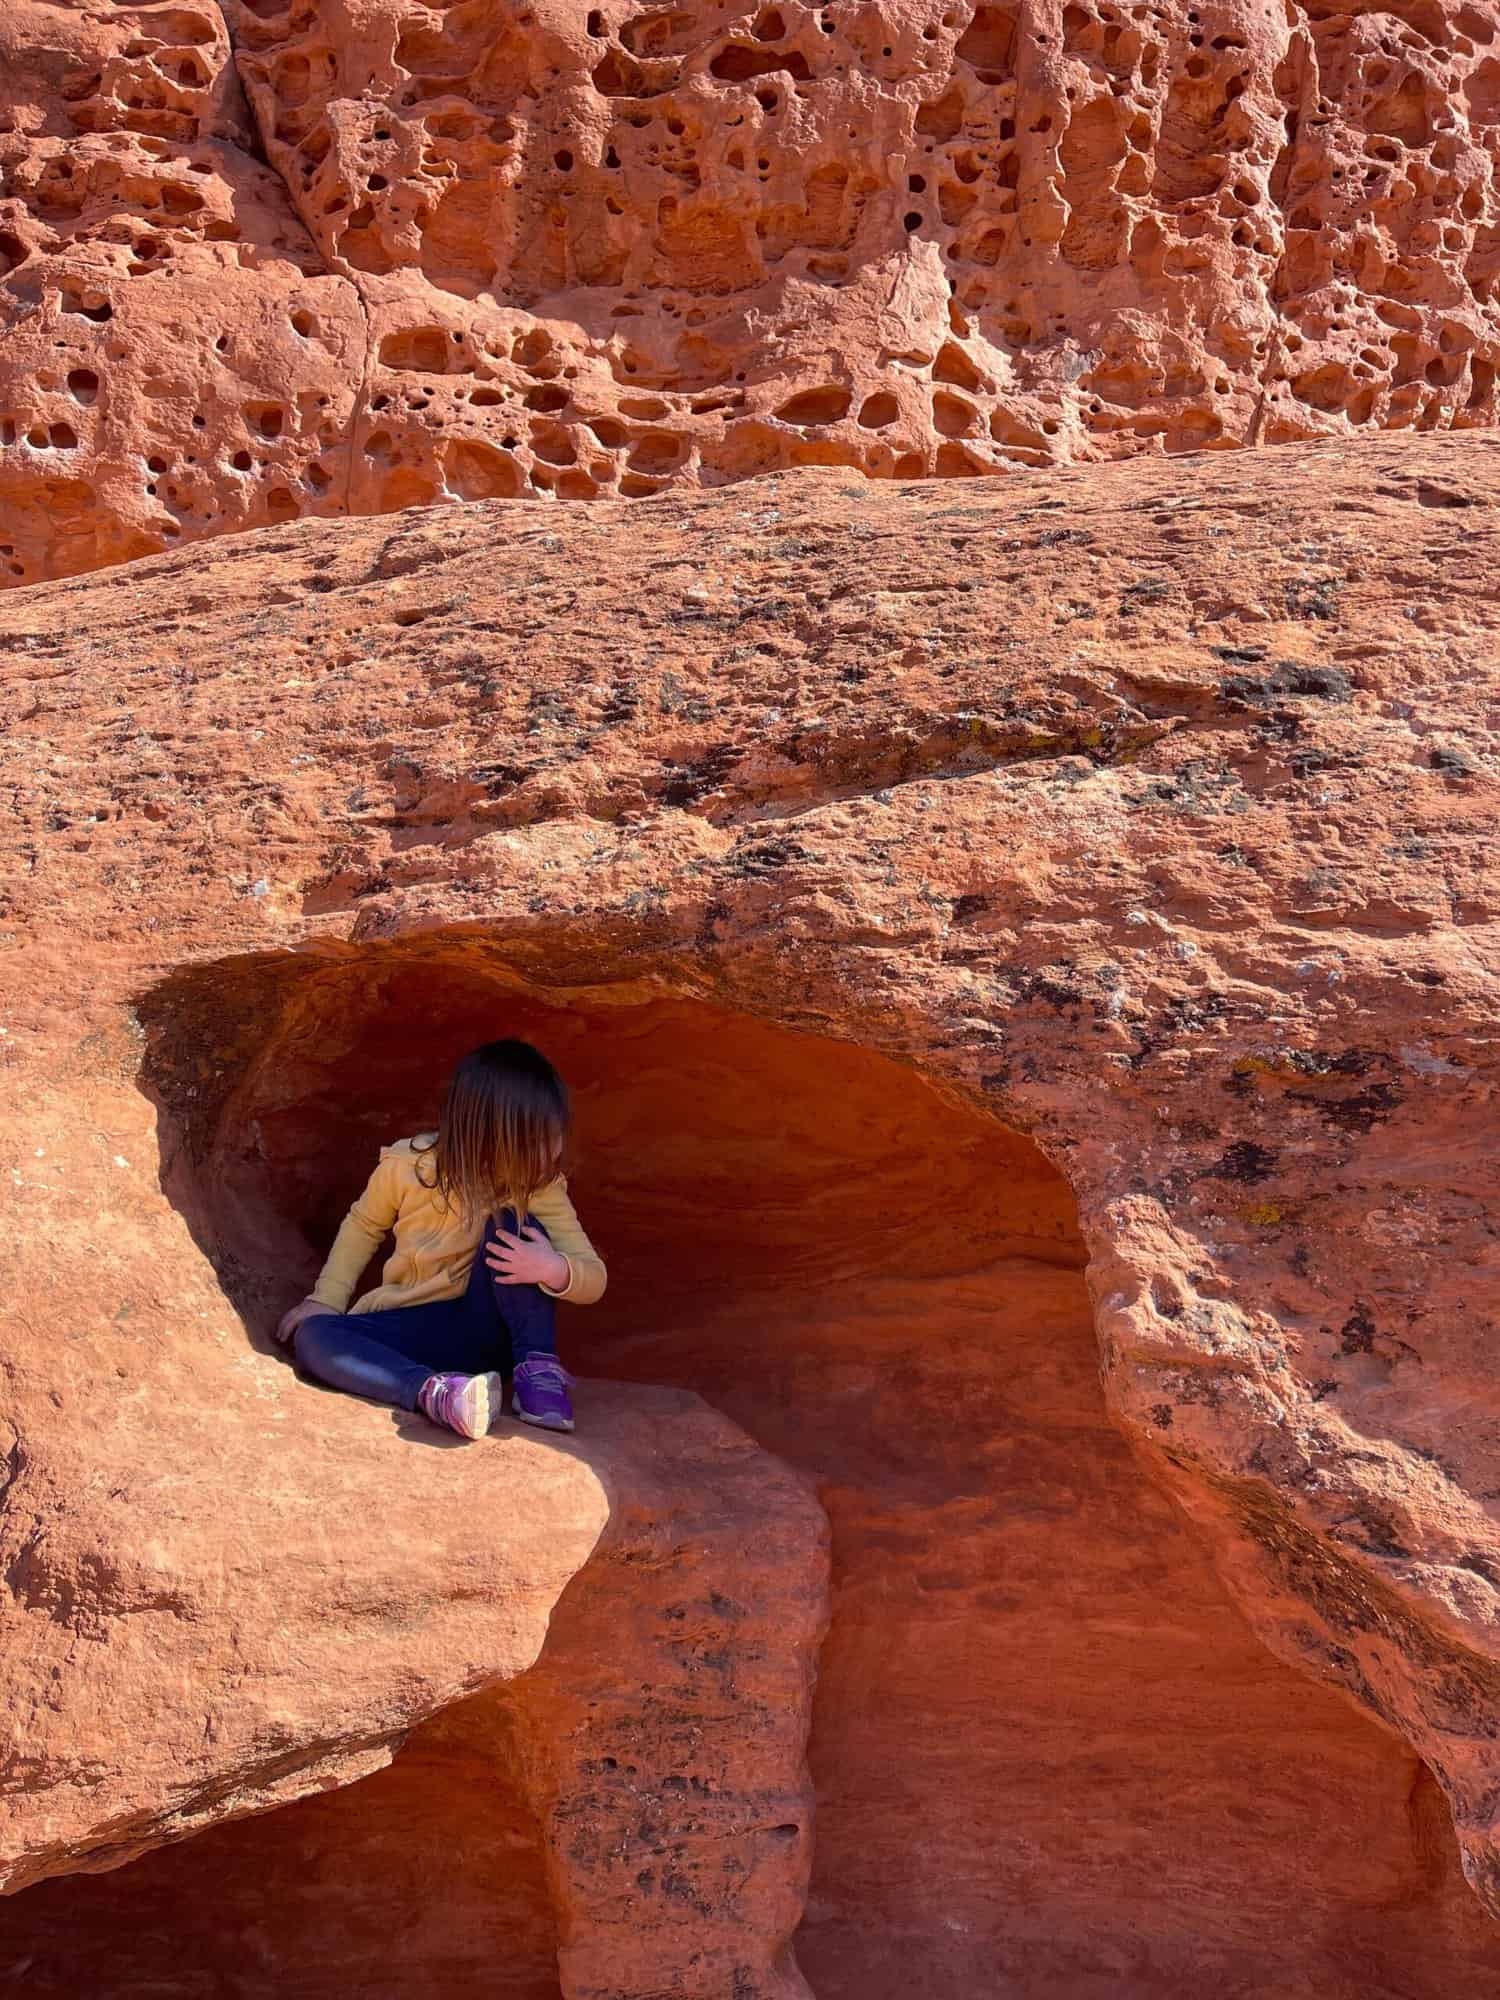 Child sitting in an alcove of some red rocks.